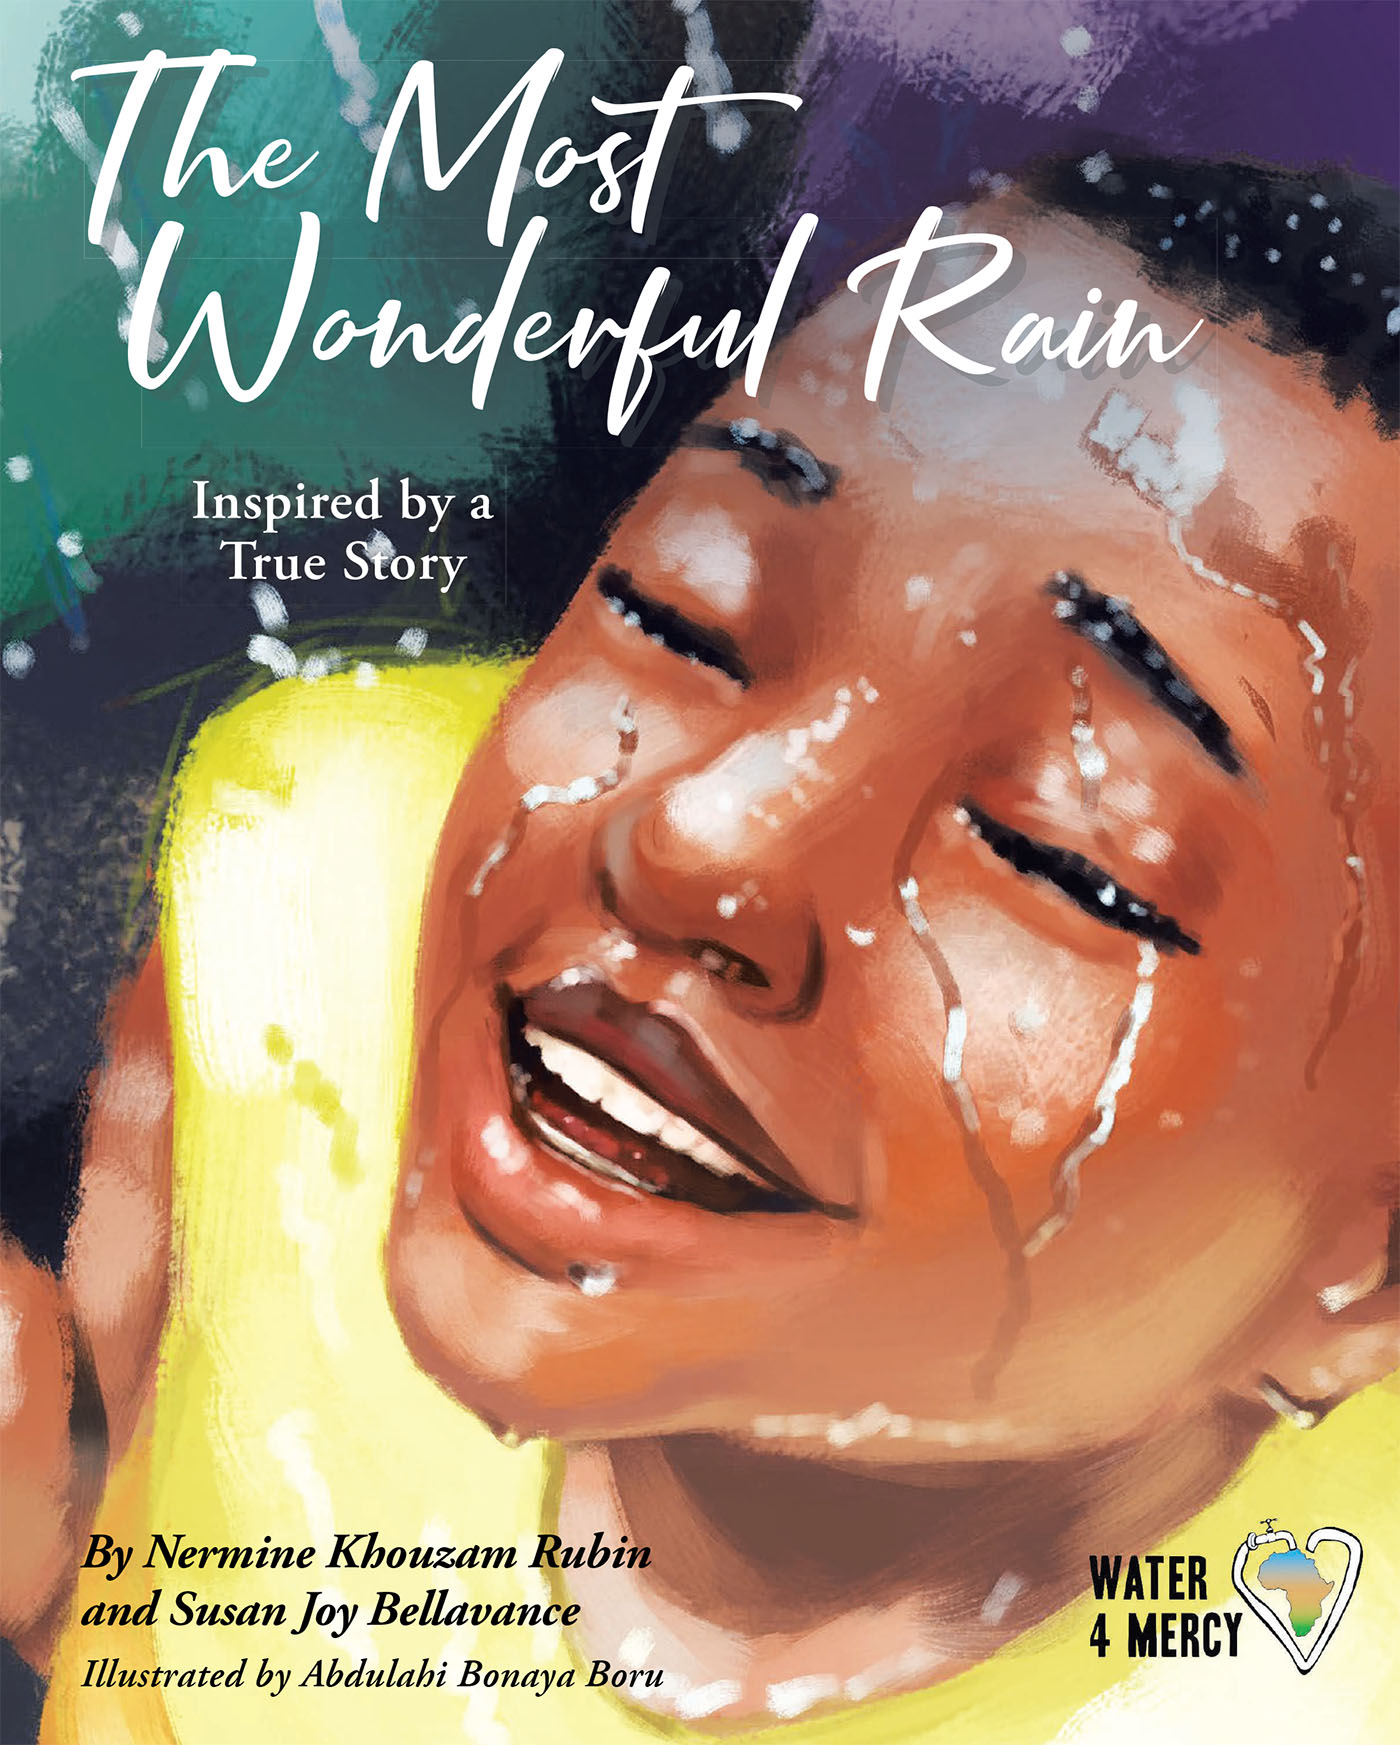 Authors Nermine Khouzam Rubin and Susan Joy Bellavance’s New Book, "The Most Wonderful Rain," Explores How Access to Clean Water Can Help End the Global Cycle of Poverty